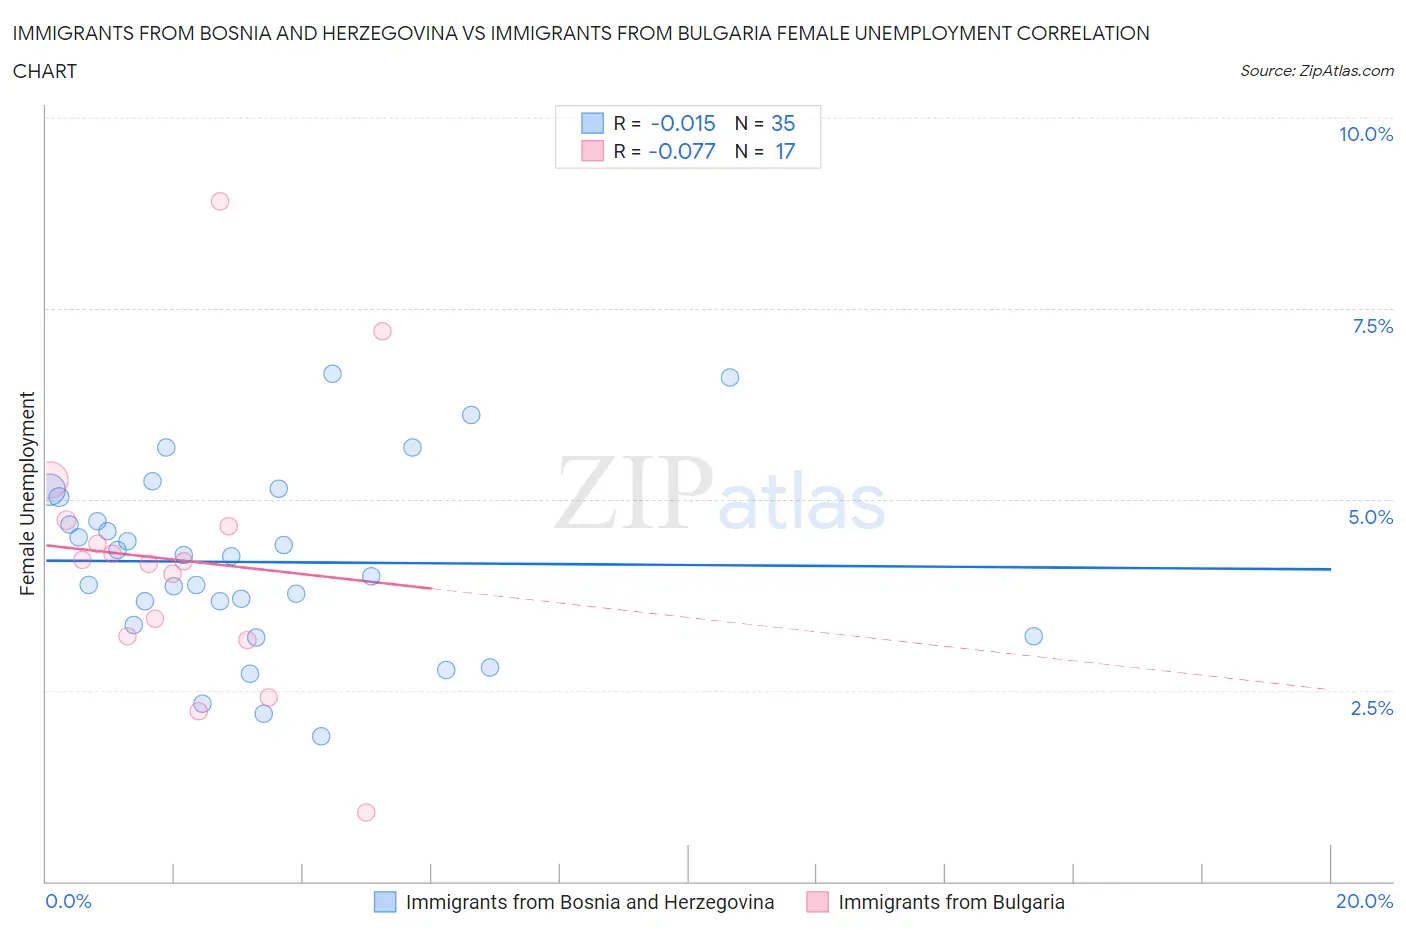 Immigrants from Bosnia and Herzegovina vs Immigrants from Bulgaria Female Unemployment